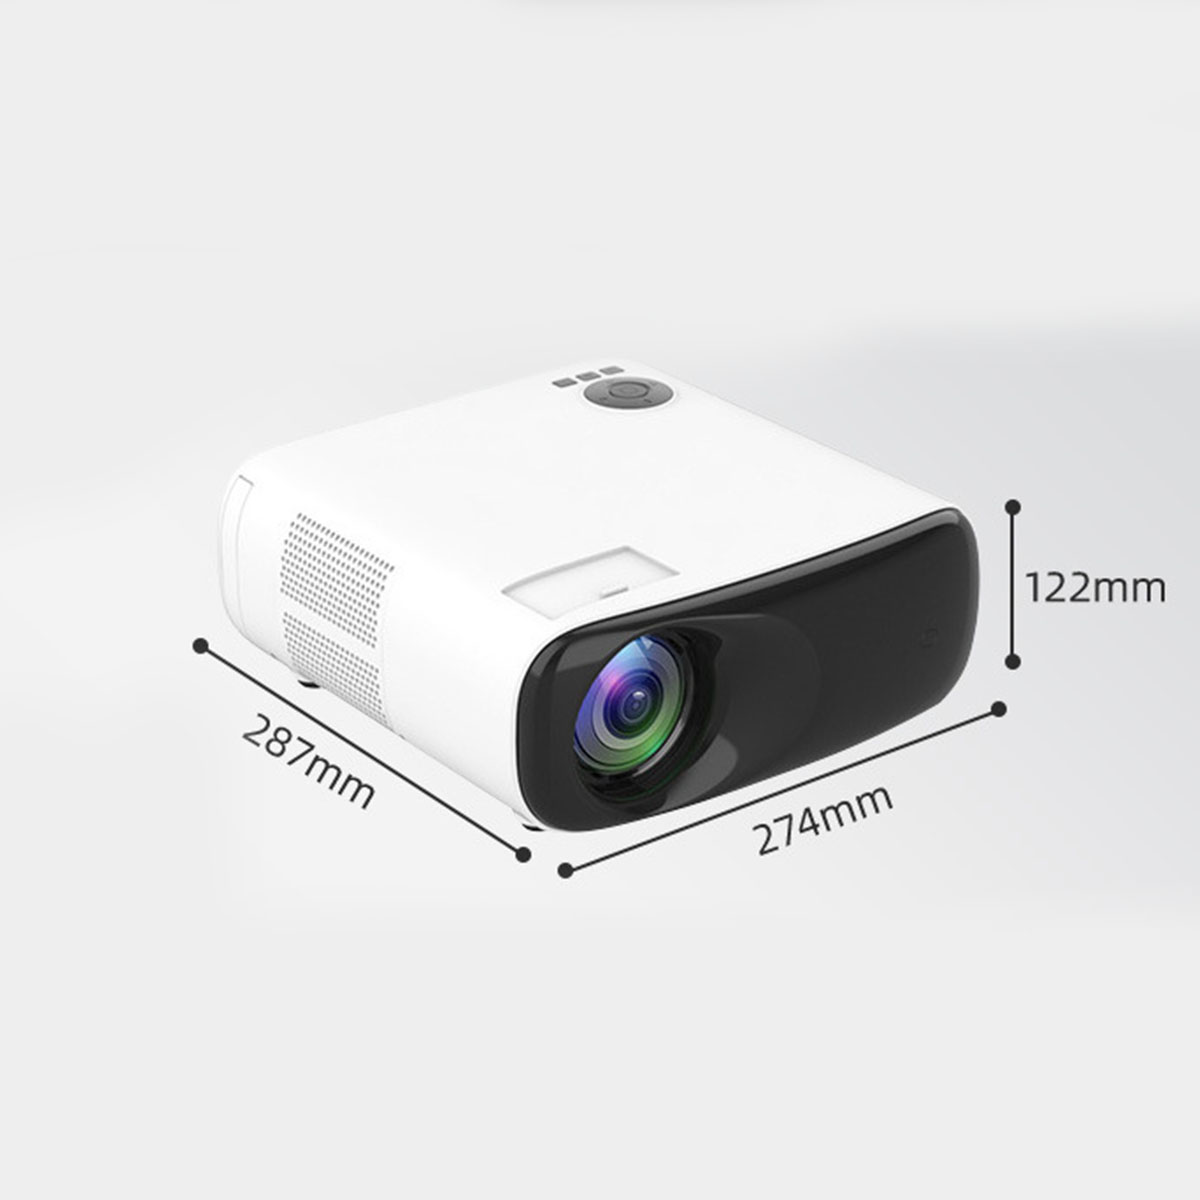 BRIGHTAKE 4K Beamer(HDR Voice Control HD 4K) | Quality, Smart 5GWIFI, Projector Android